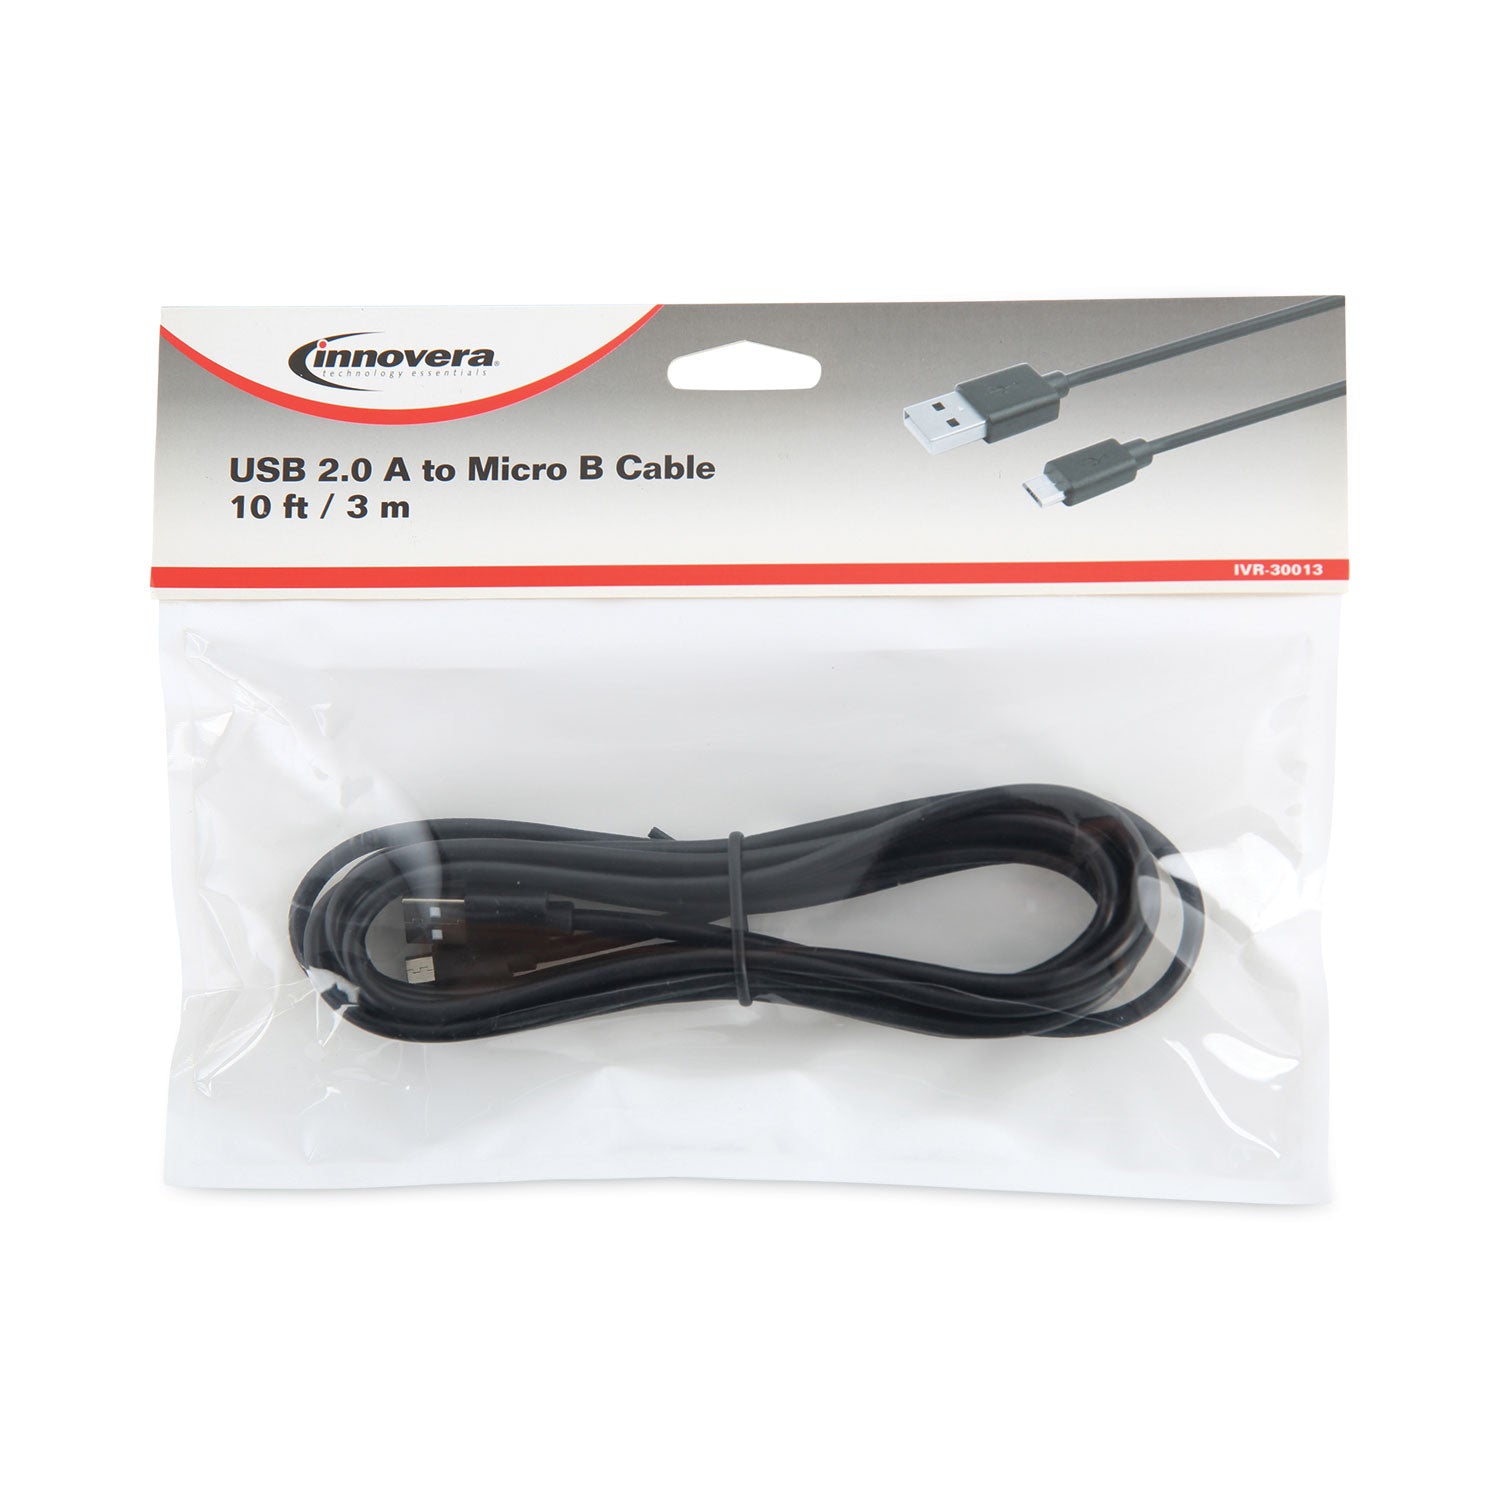 usb-to-micro-usb-cable-10-ft-black_ivr30013 - 3